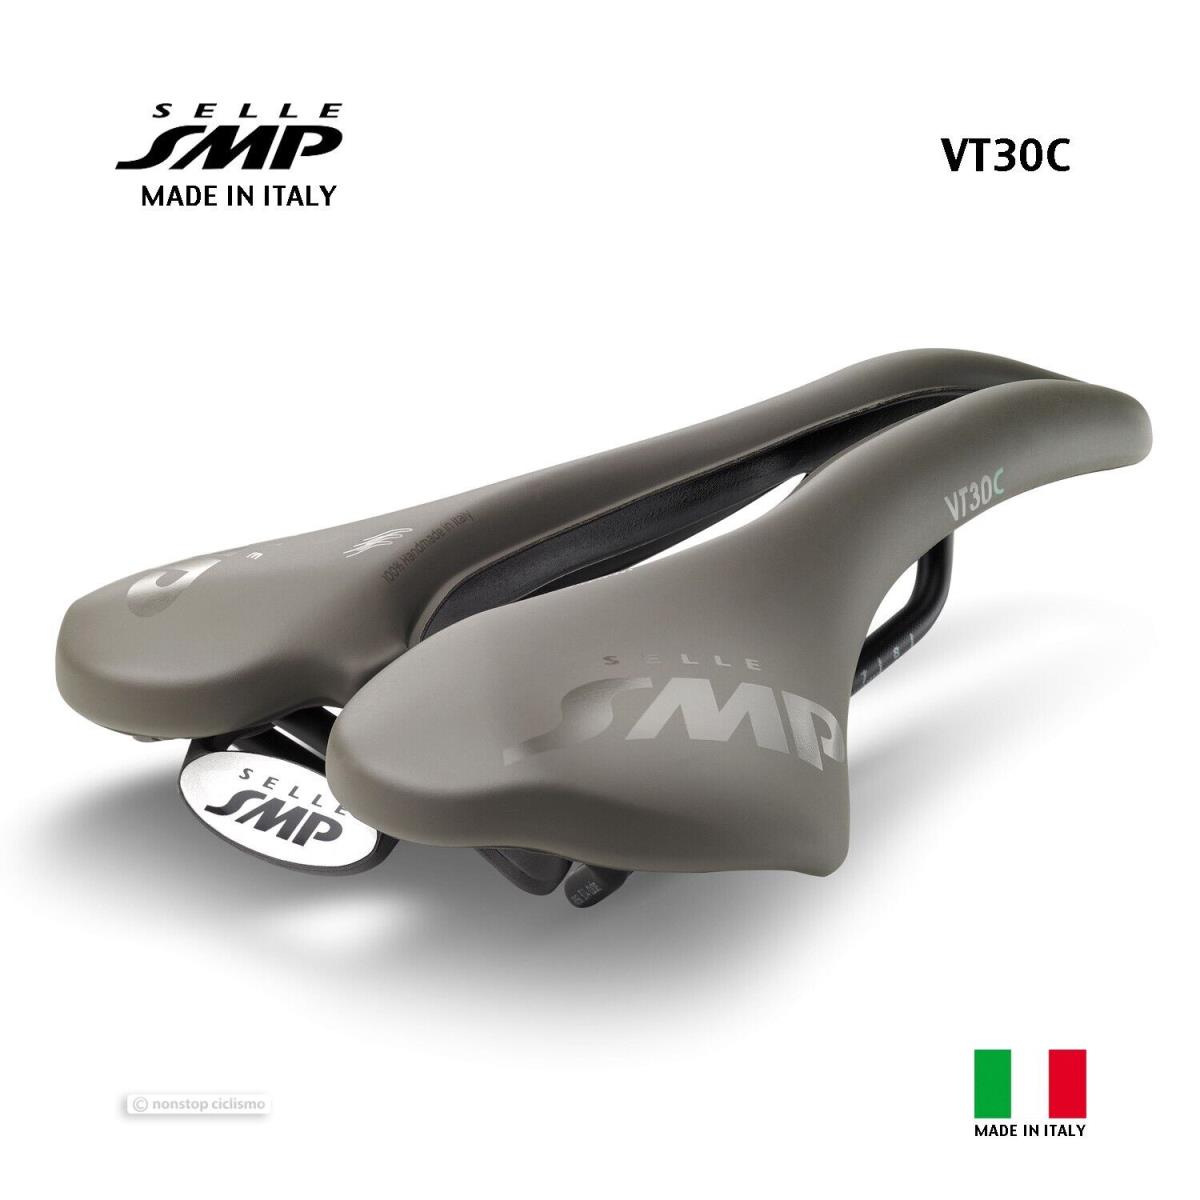 Selle Smp VT30C Saddle : Grey-brown Gravel - Made IN Italy